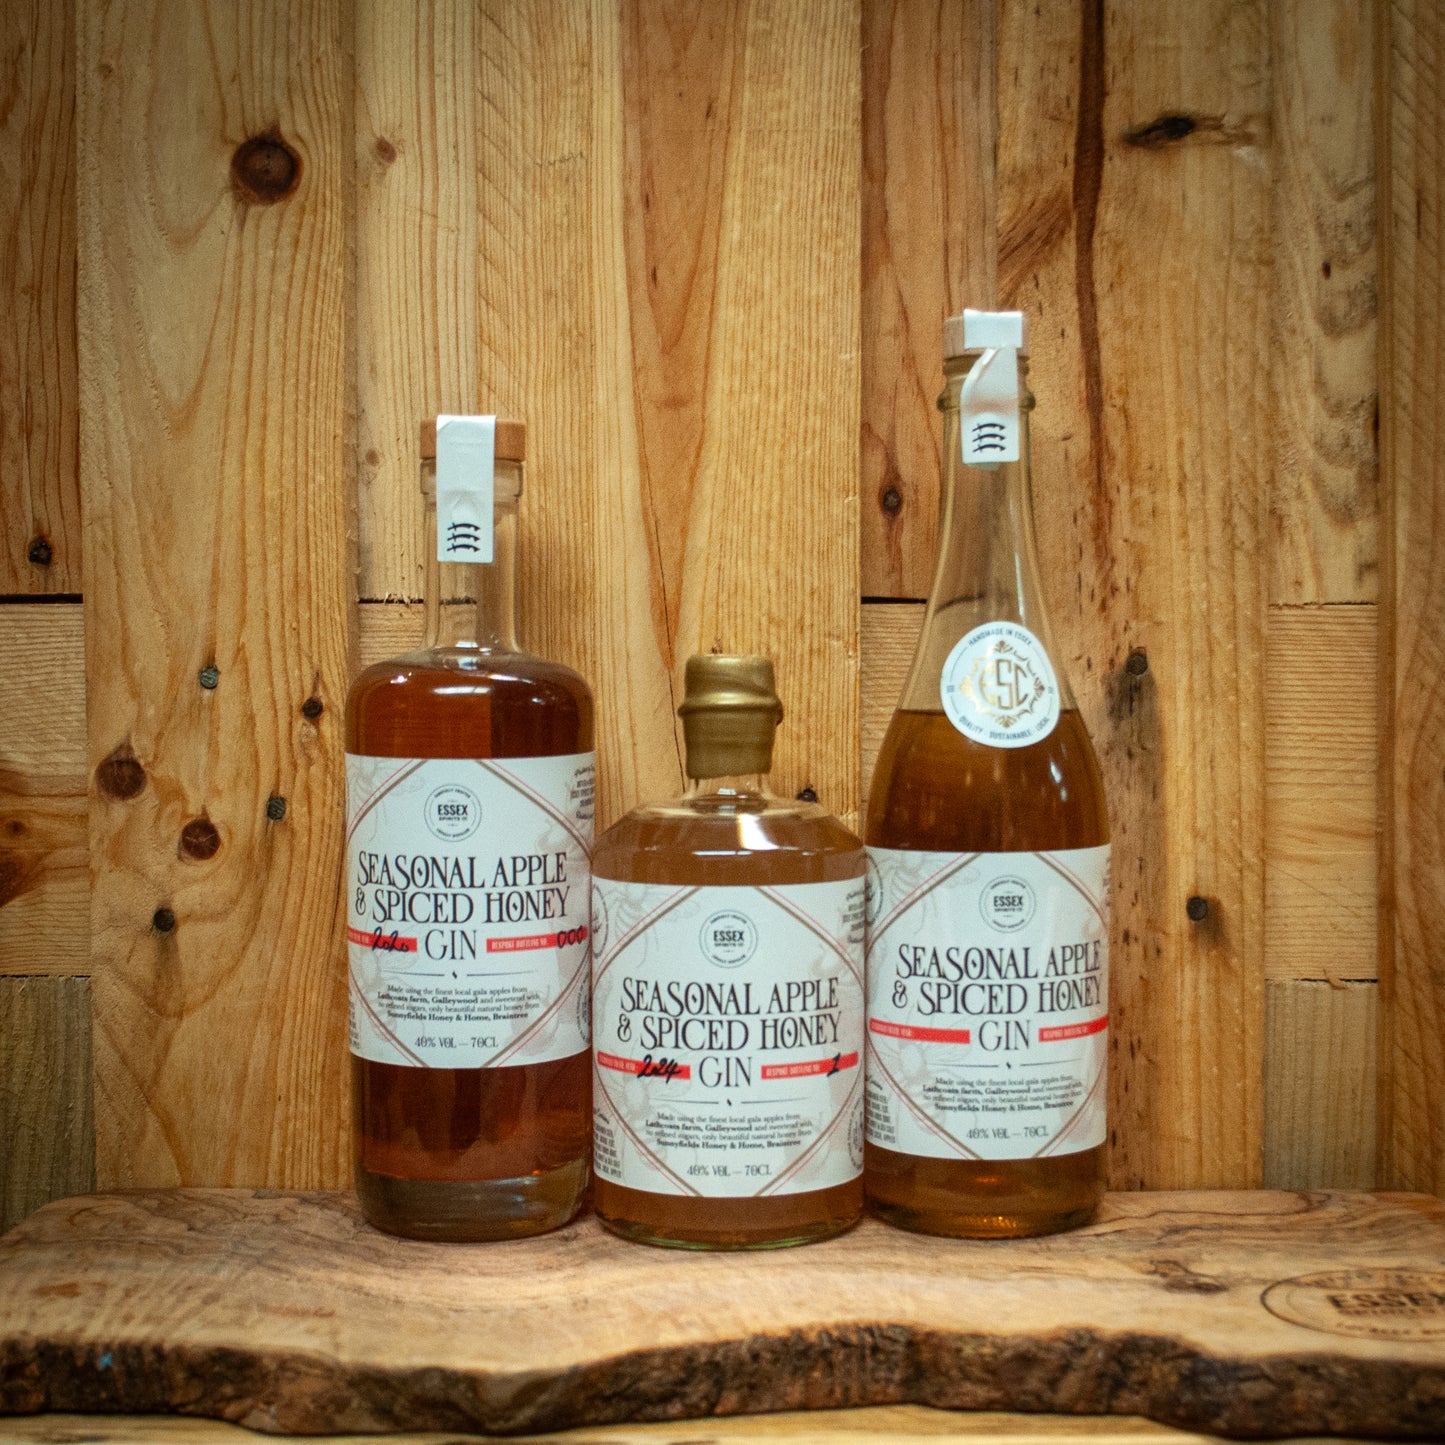 The evolution of the bottle of the Seasonal Apple & Spiced Honey Gin from Essex Spirits Company, Chelmsford Distillery